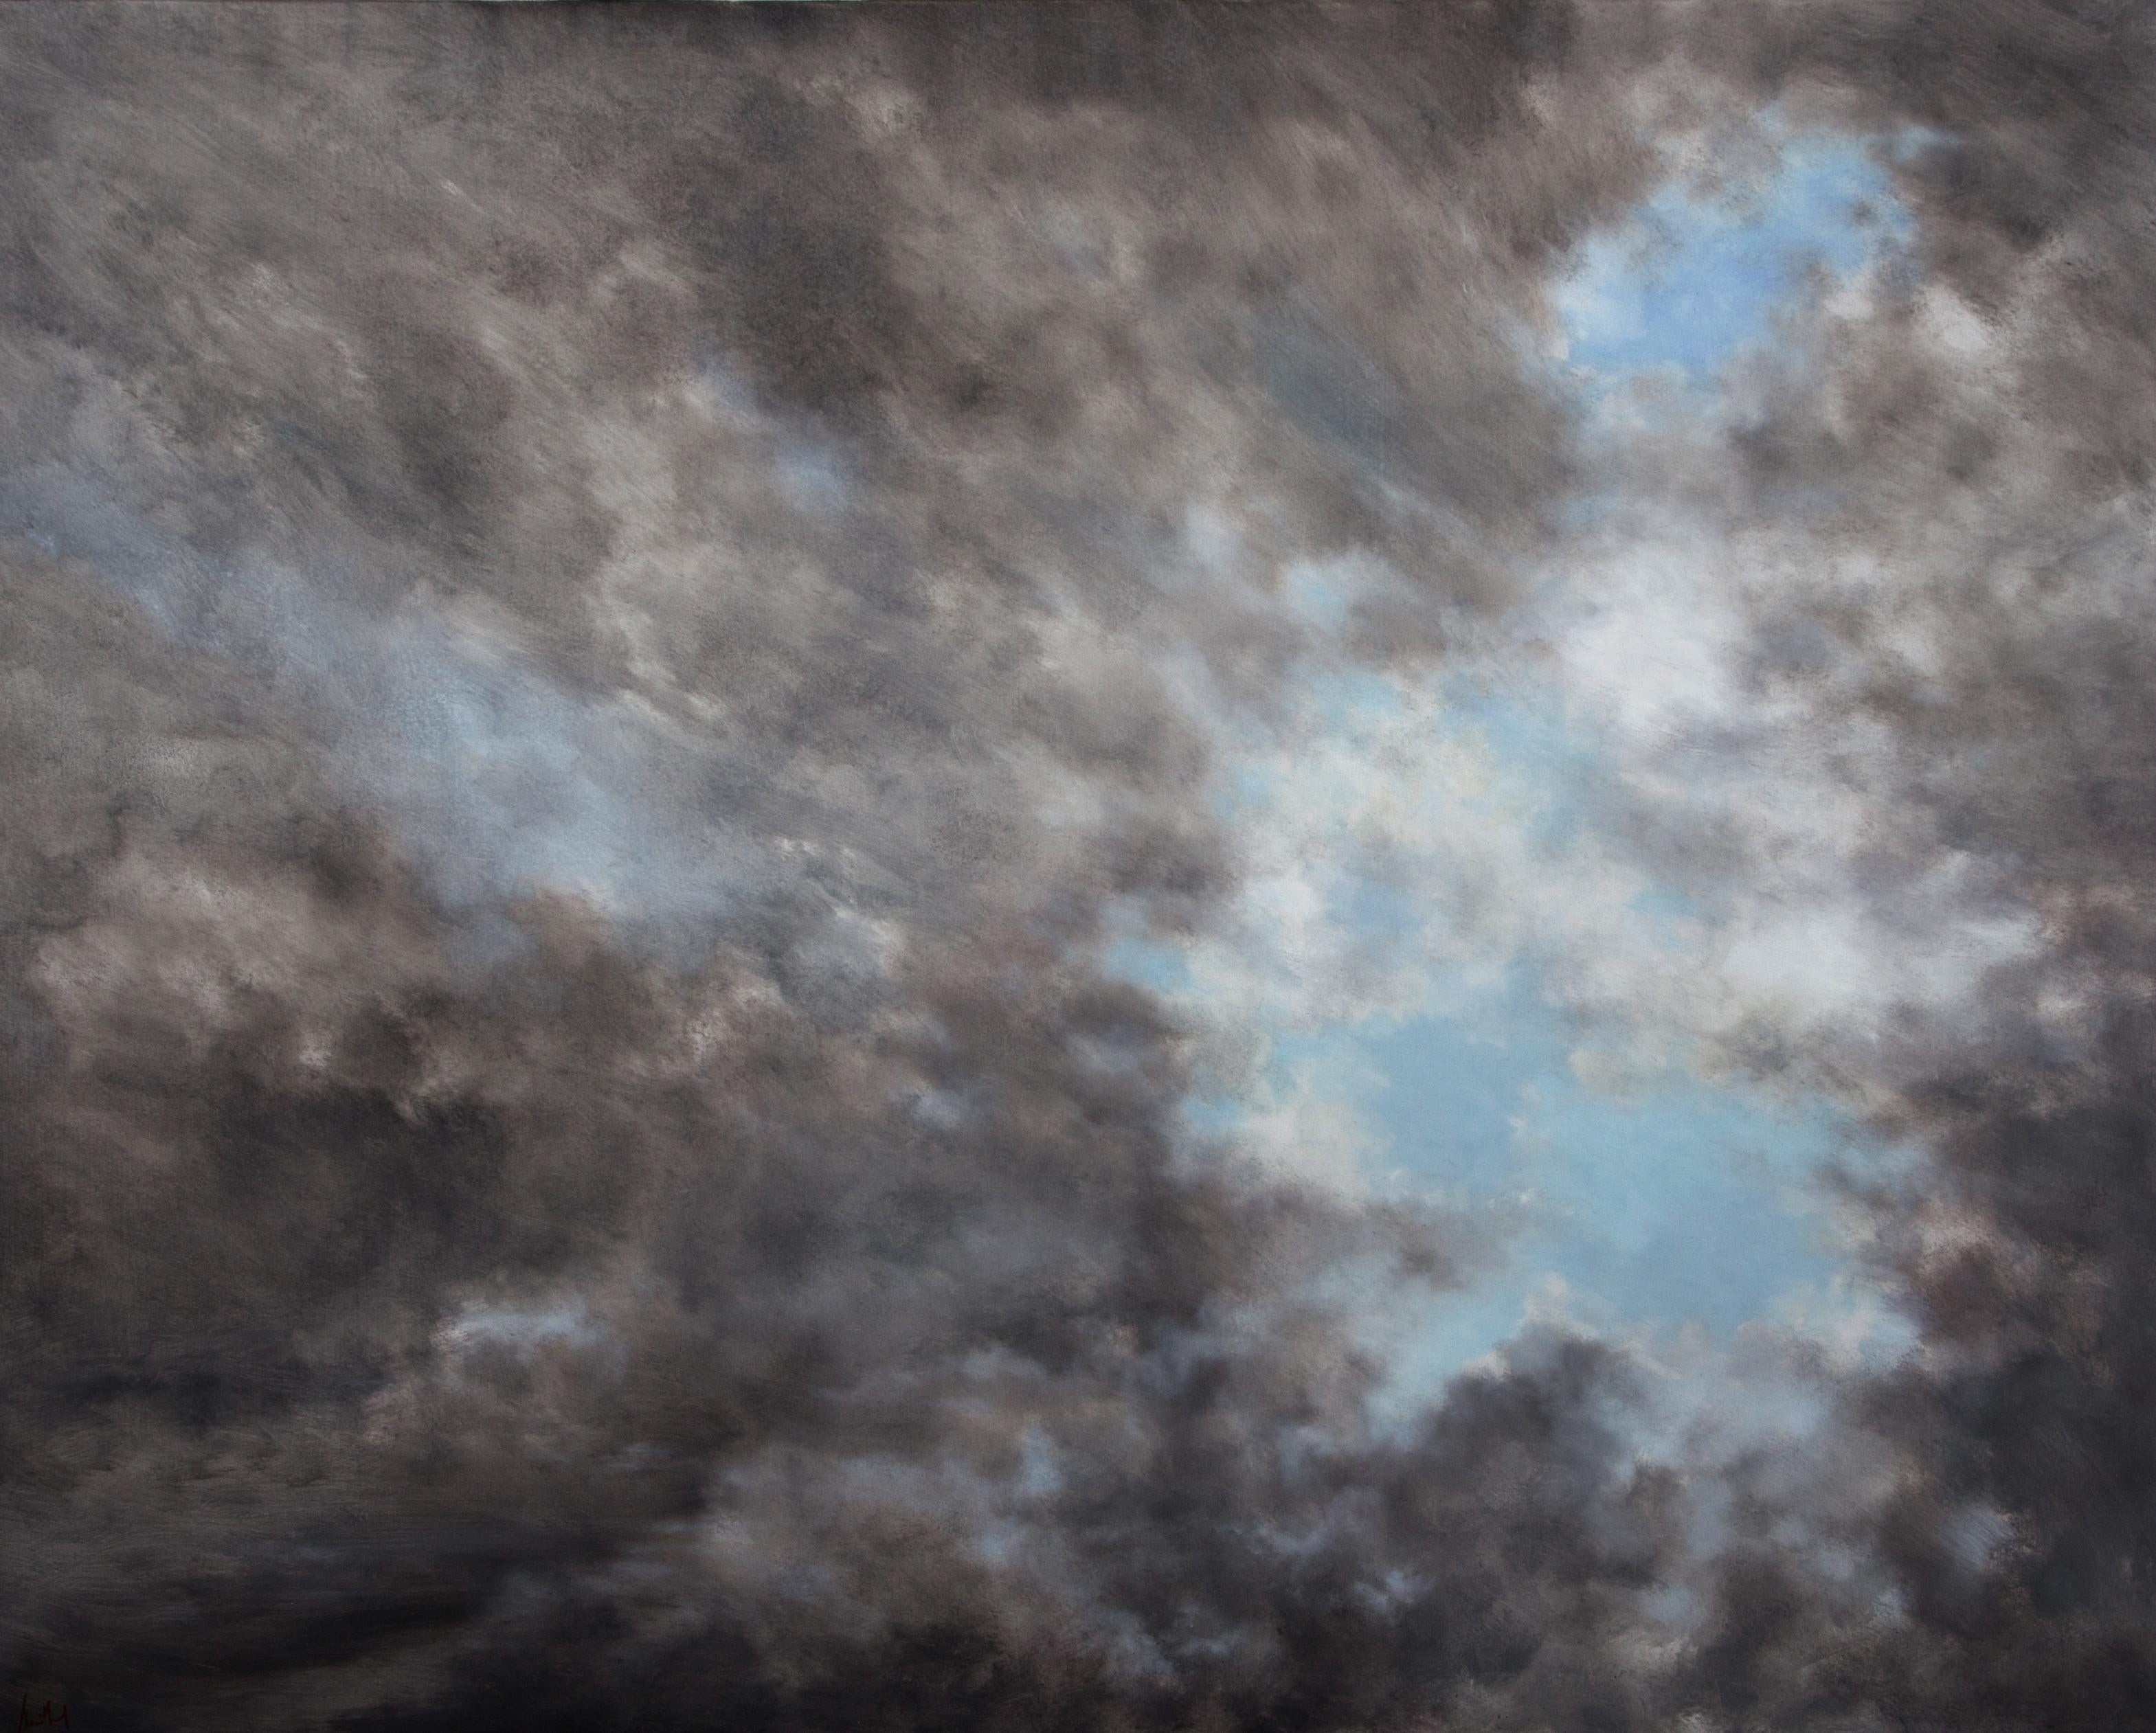 Artist statement:

The Generosity of Skies

I love the clouds… the clouds that pass by… out there… the wonderful clouds! 

For the artist Franck Bailleul, the sky is not static: “The perpetually moving skies (…) are incessantly altering their